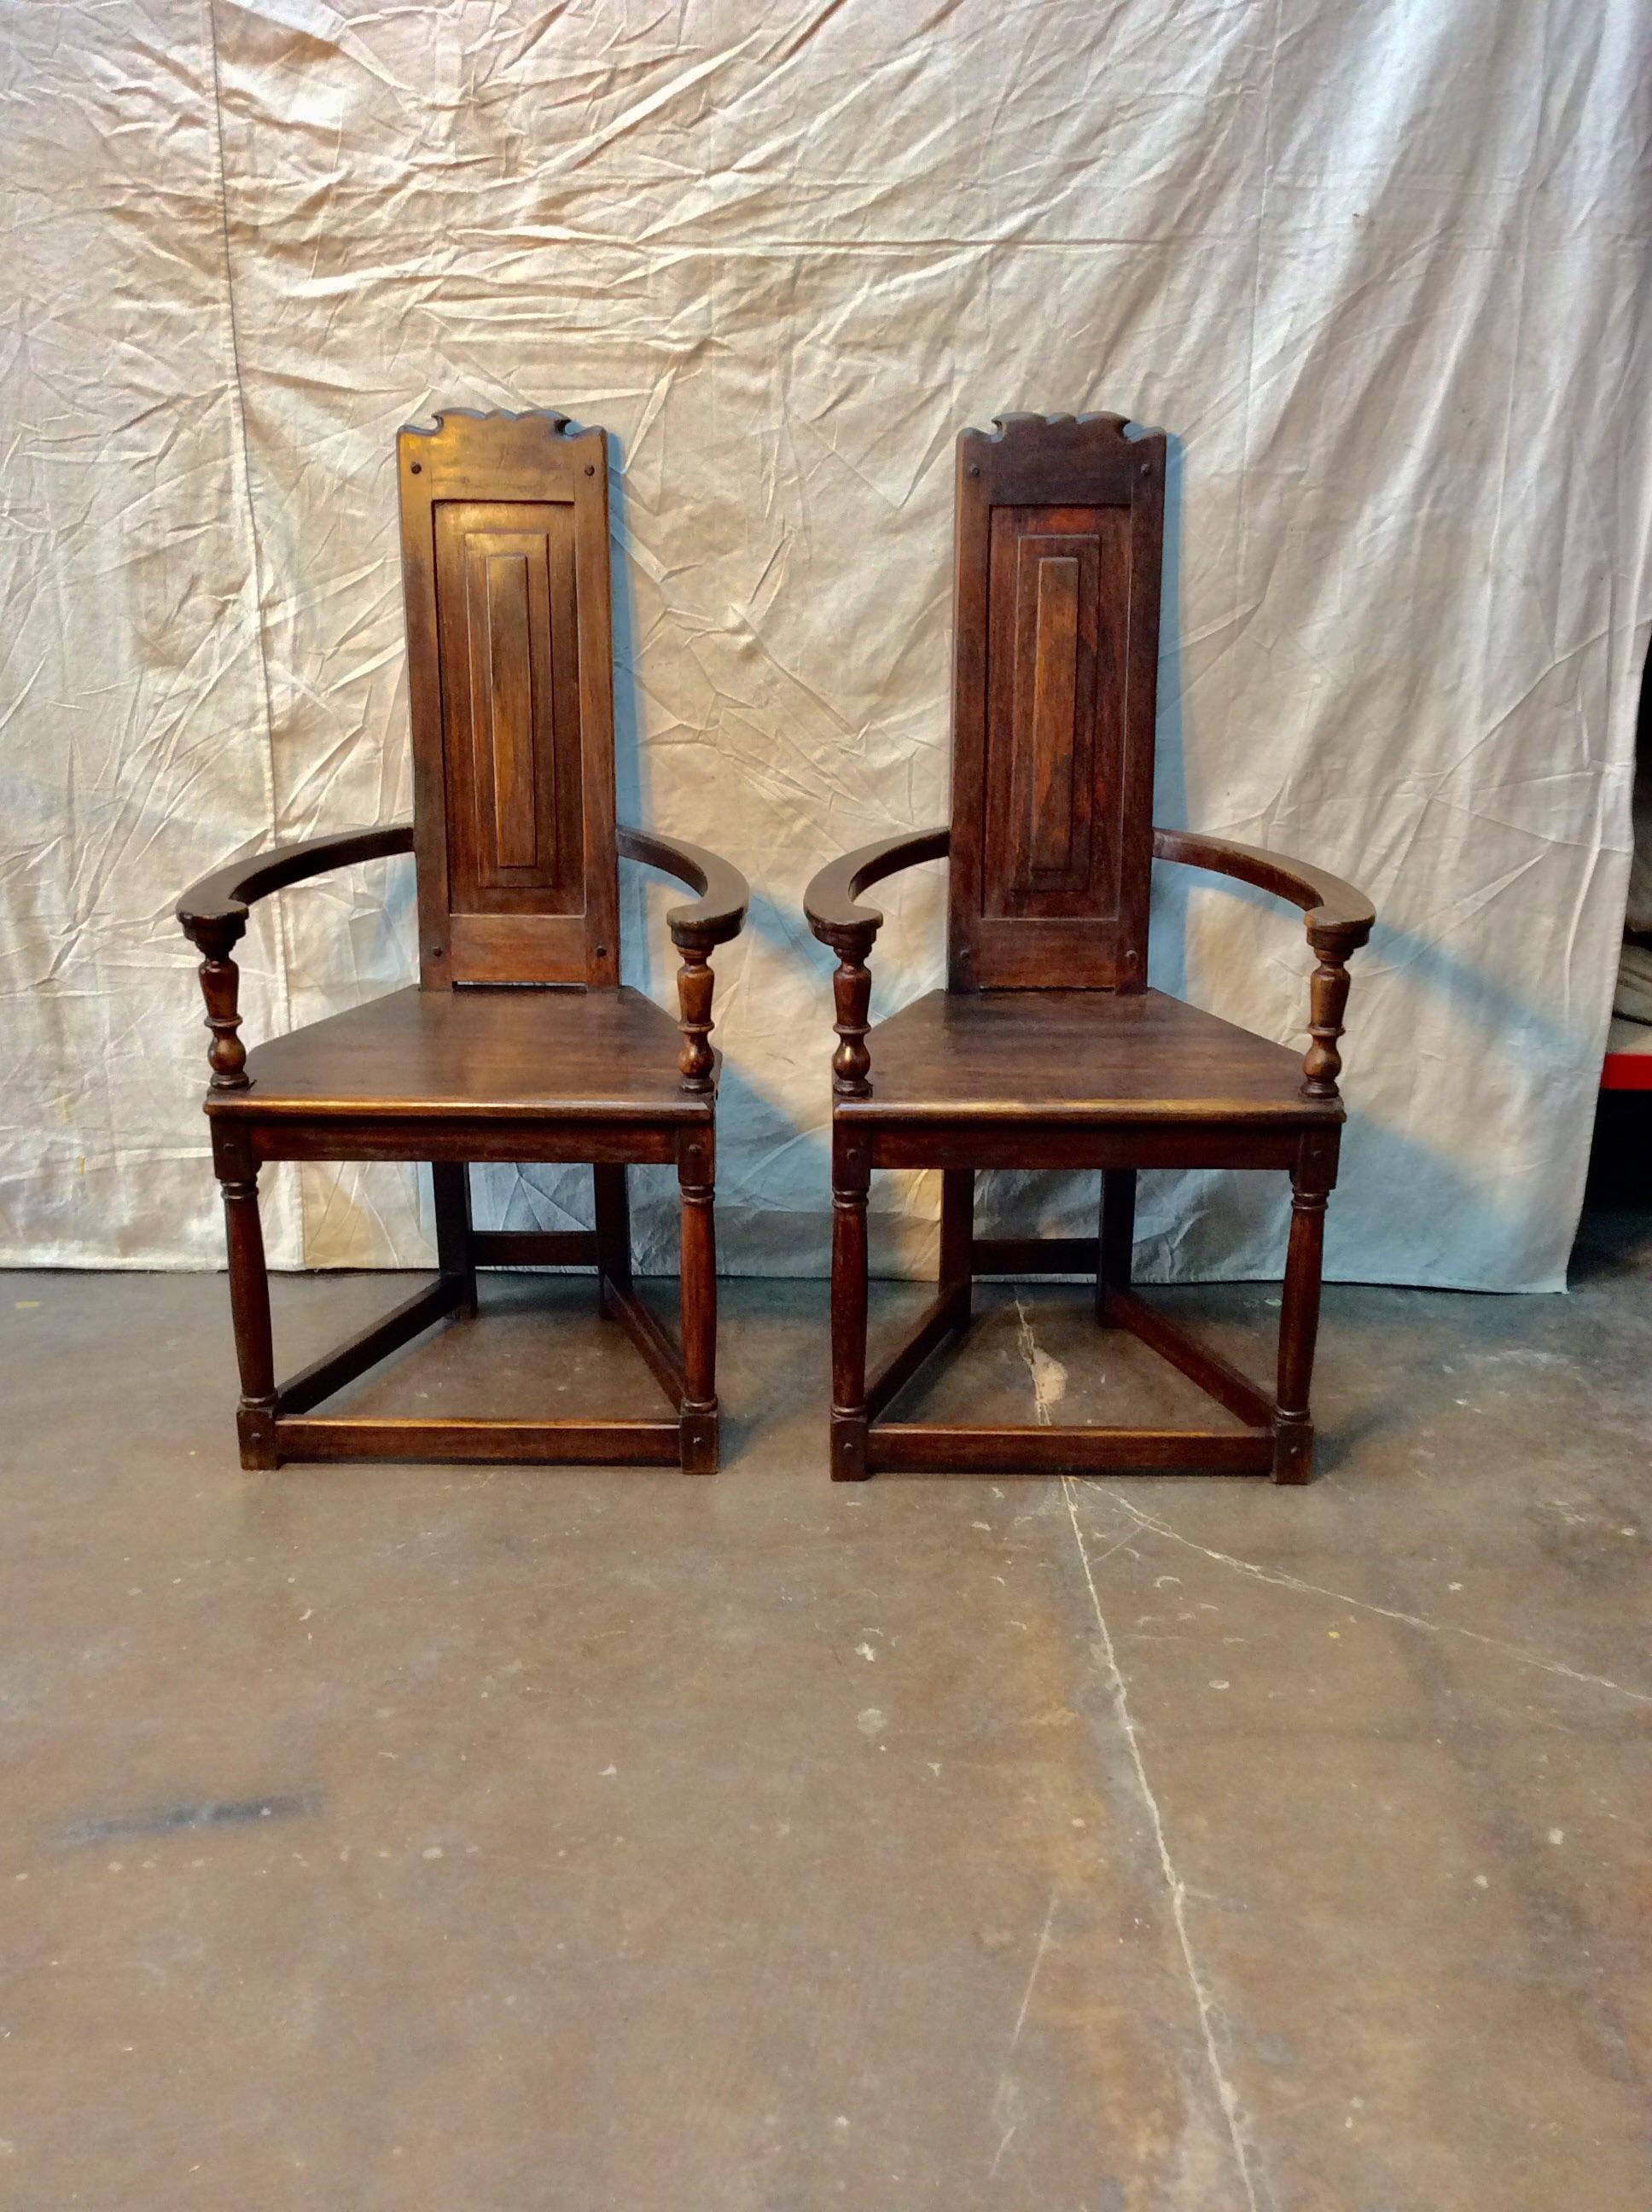 Found in the South of France, this pair of French Walnut Armchairs were crafted in the early 1900s. Each chair features barrel style arms with a carved narrow seat back. The solid wood trapezoidal shaped seat rest on turned legs flanked by